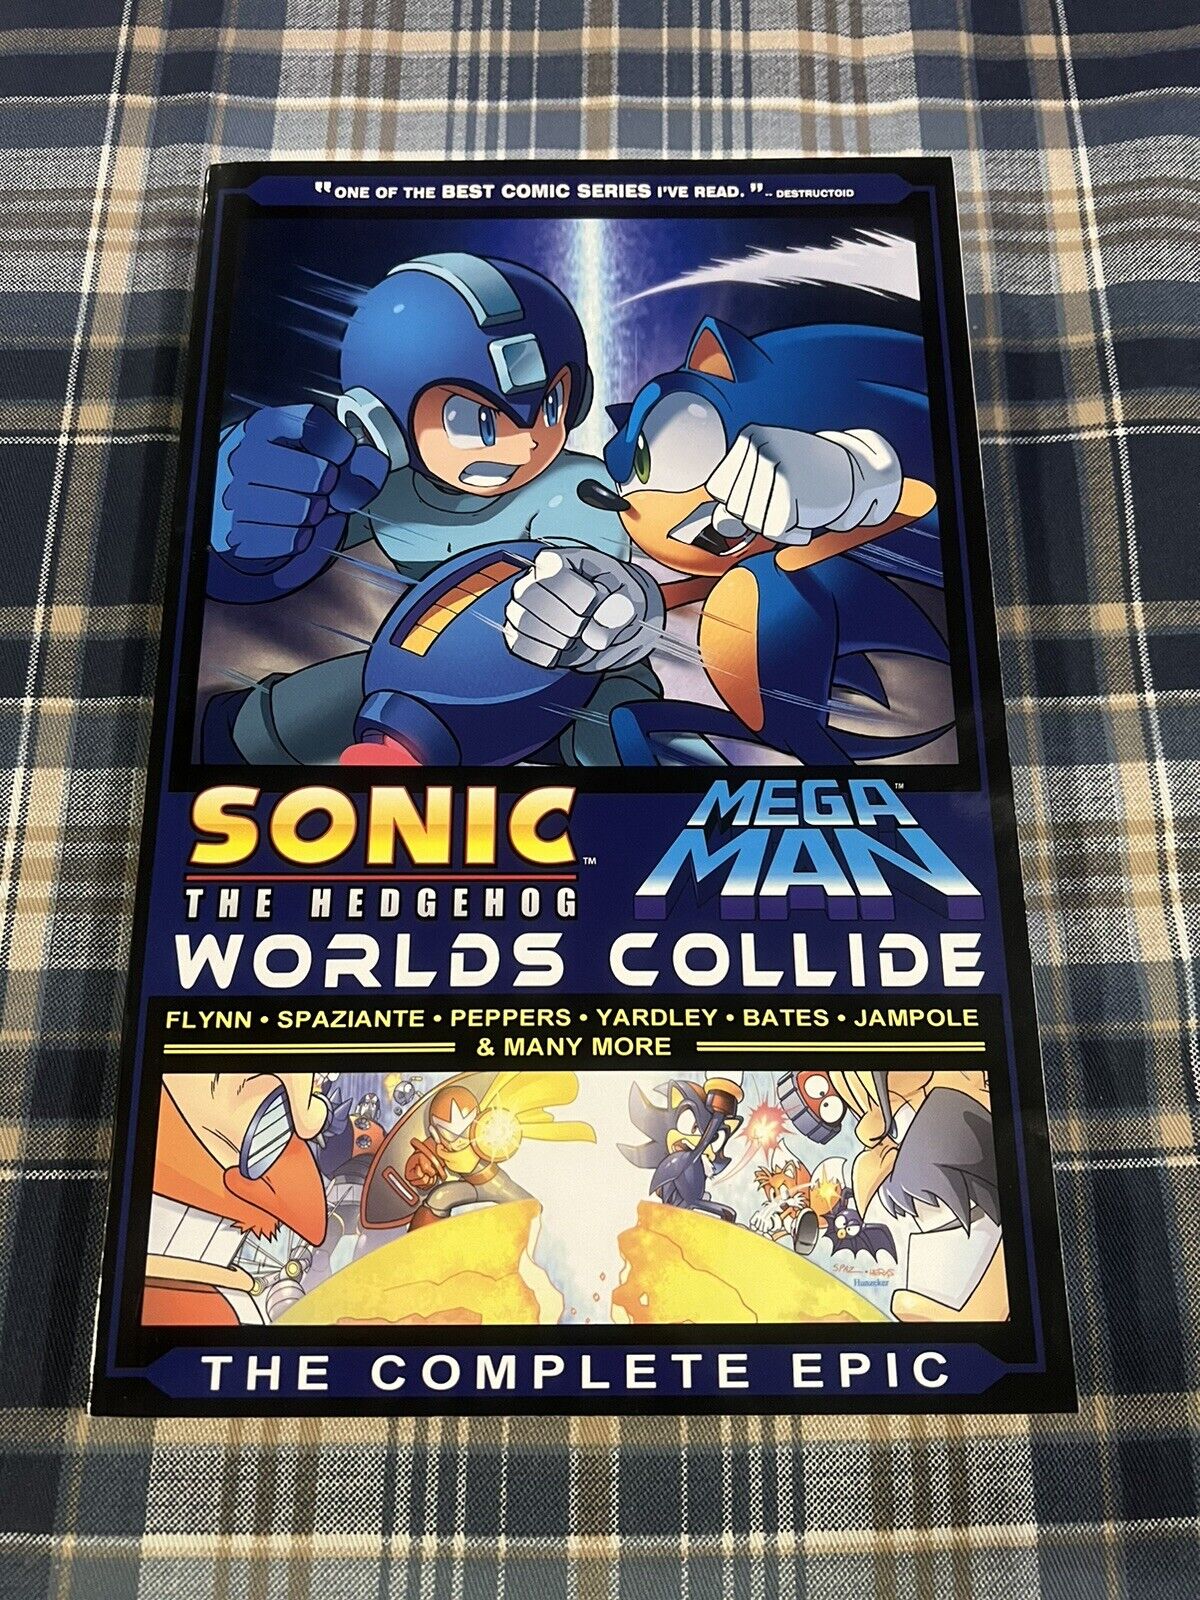 Sonic Mega Man Worlds Collide Complete Epic PX Edition Tpb Omnibus